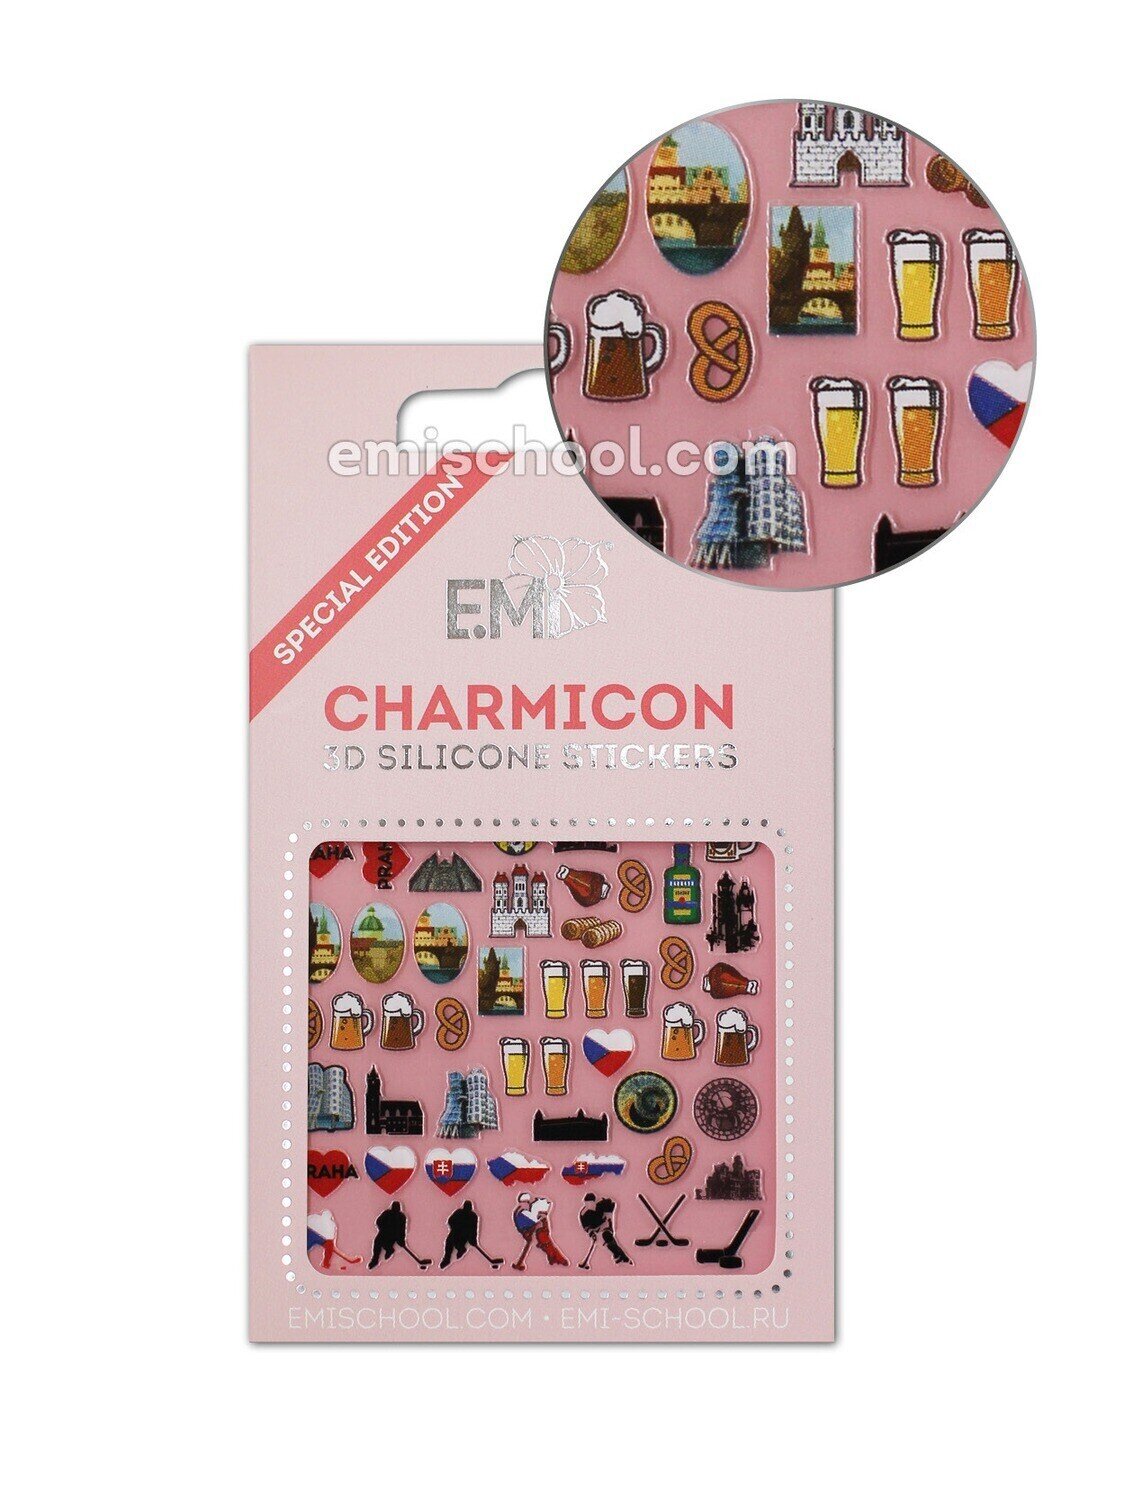 Charmicon 3D Silicone Stickers Czech 3